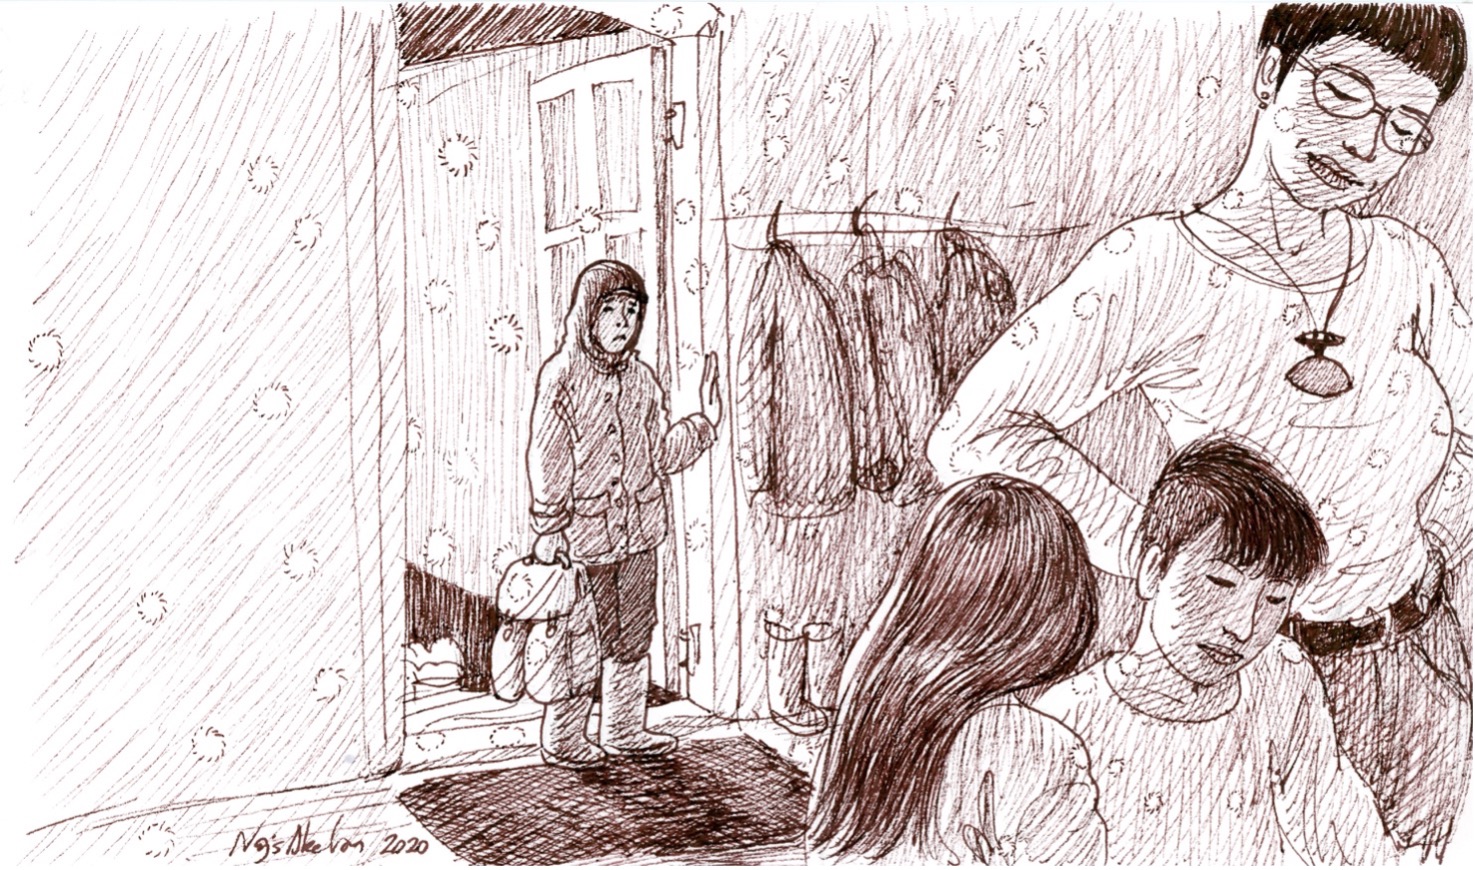 A drawing of a child arriving at a nursing home, Bonnie Jensen, Arctic Hub, out of care homes, Greenland, science, research